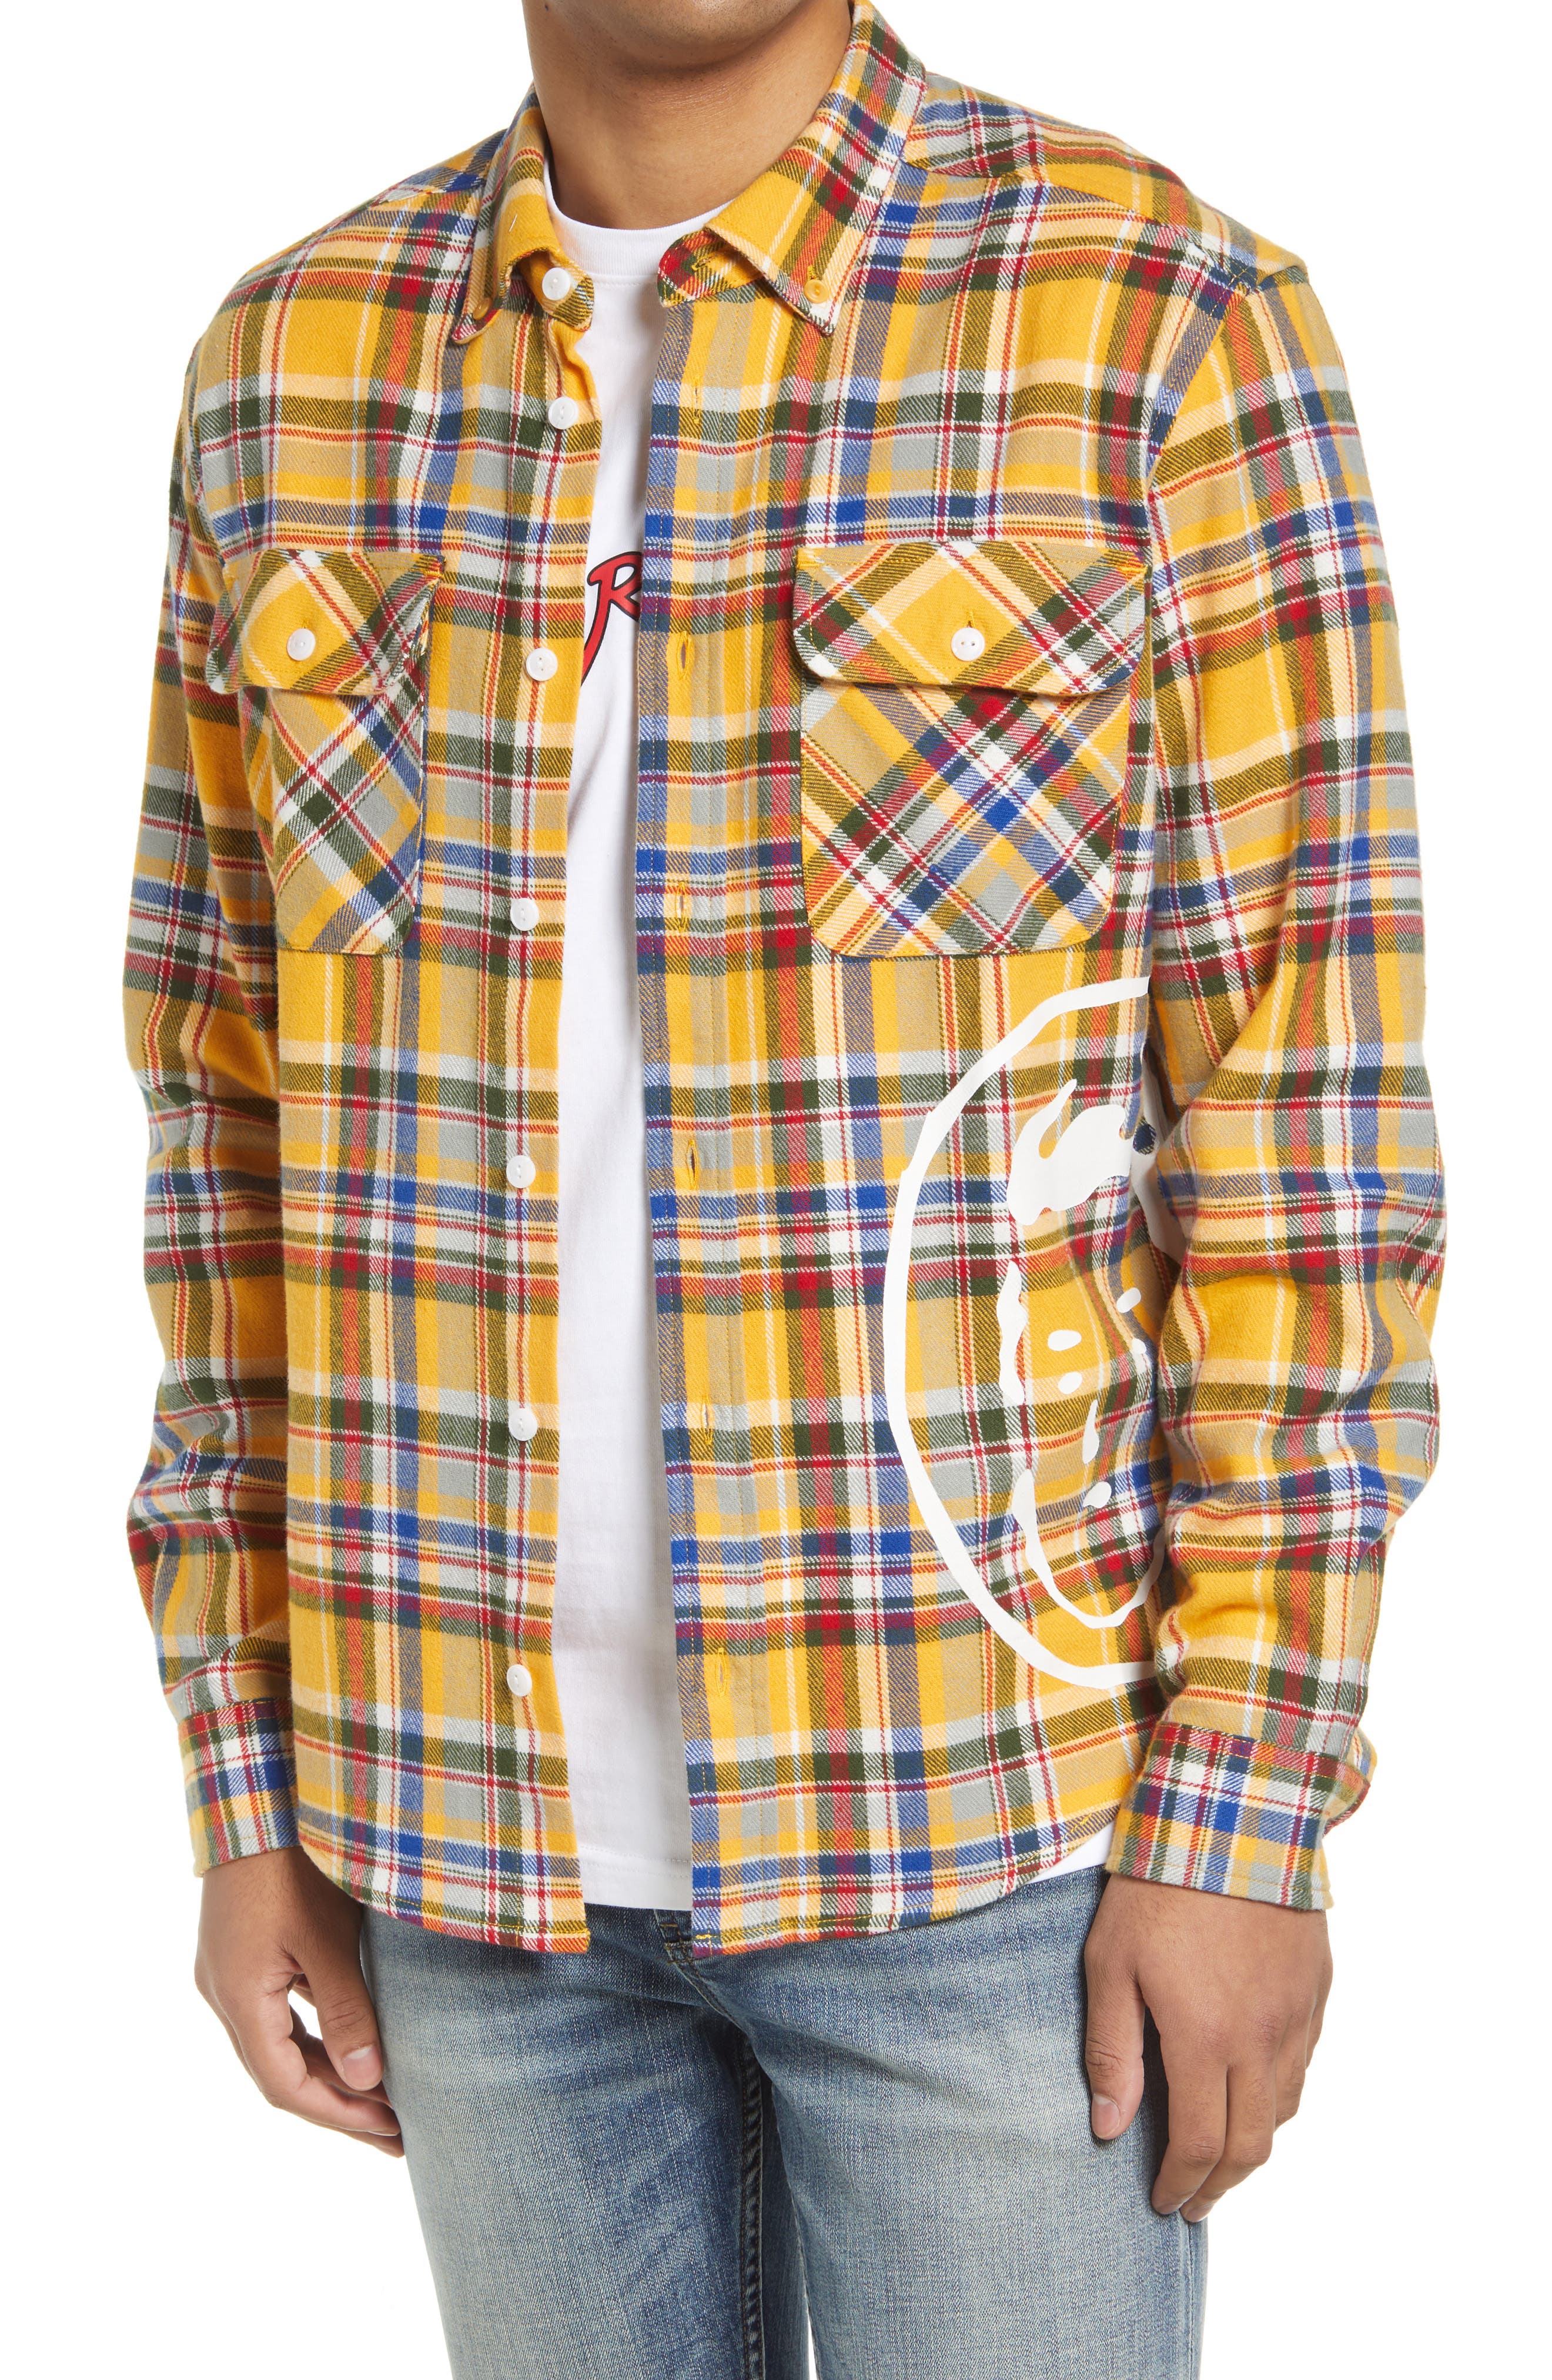 Billionaire Boys Club Men's BB Terrestrial Flannel Shirt in Beeswax at Nordstrom, Size Small